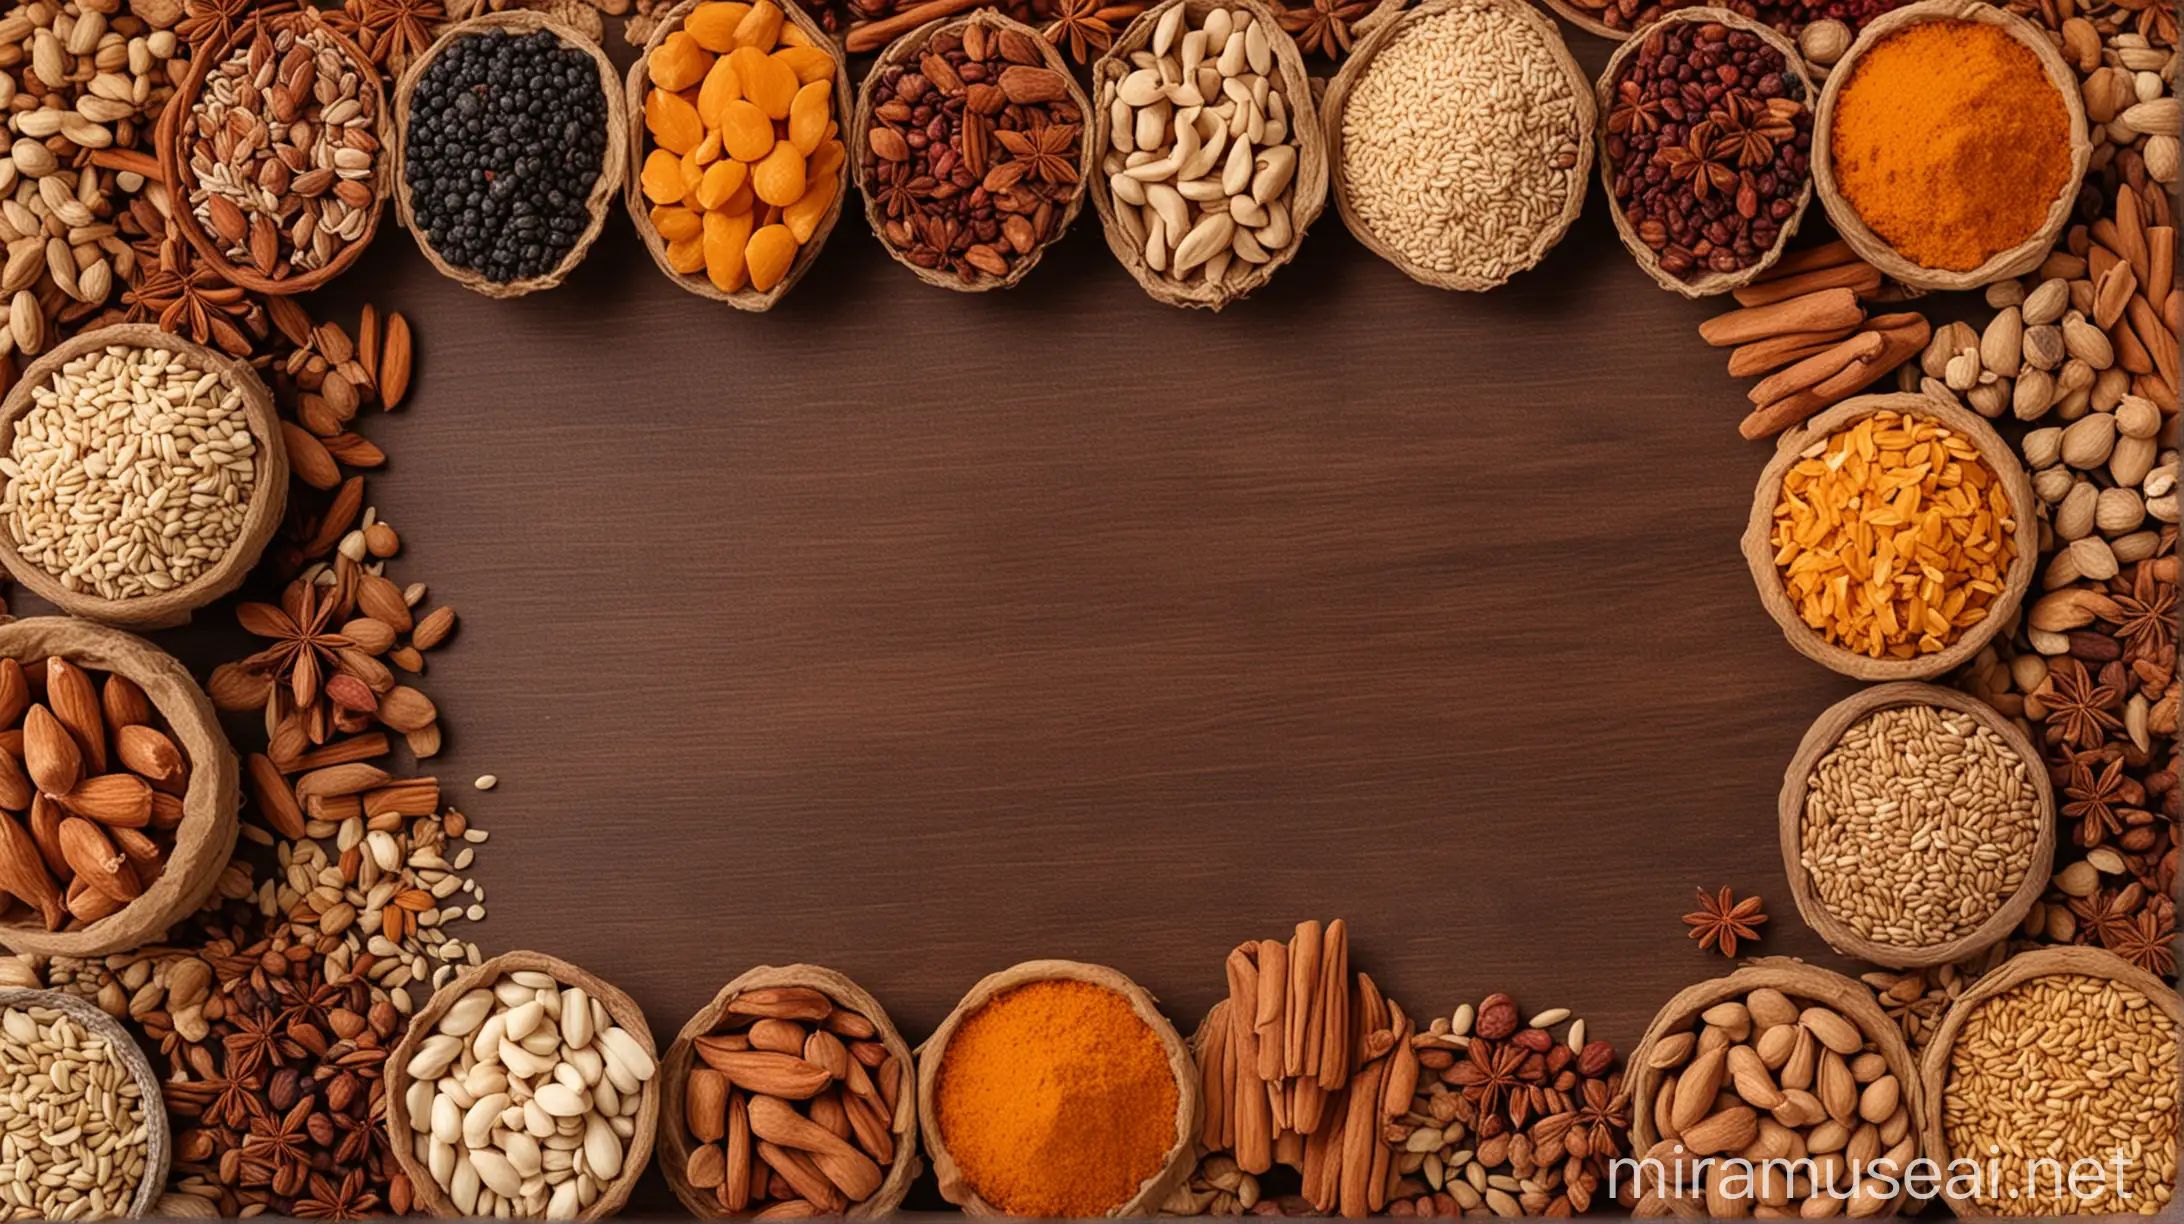 grains spices dry fruits
